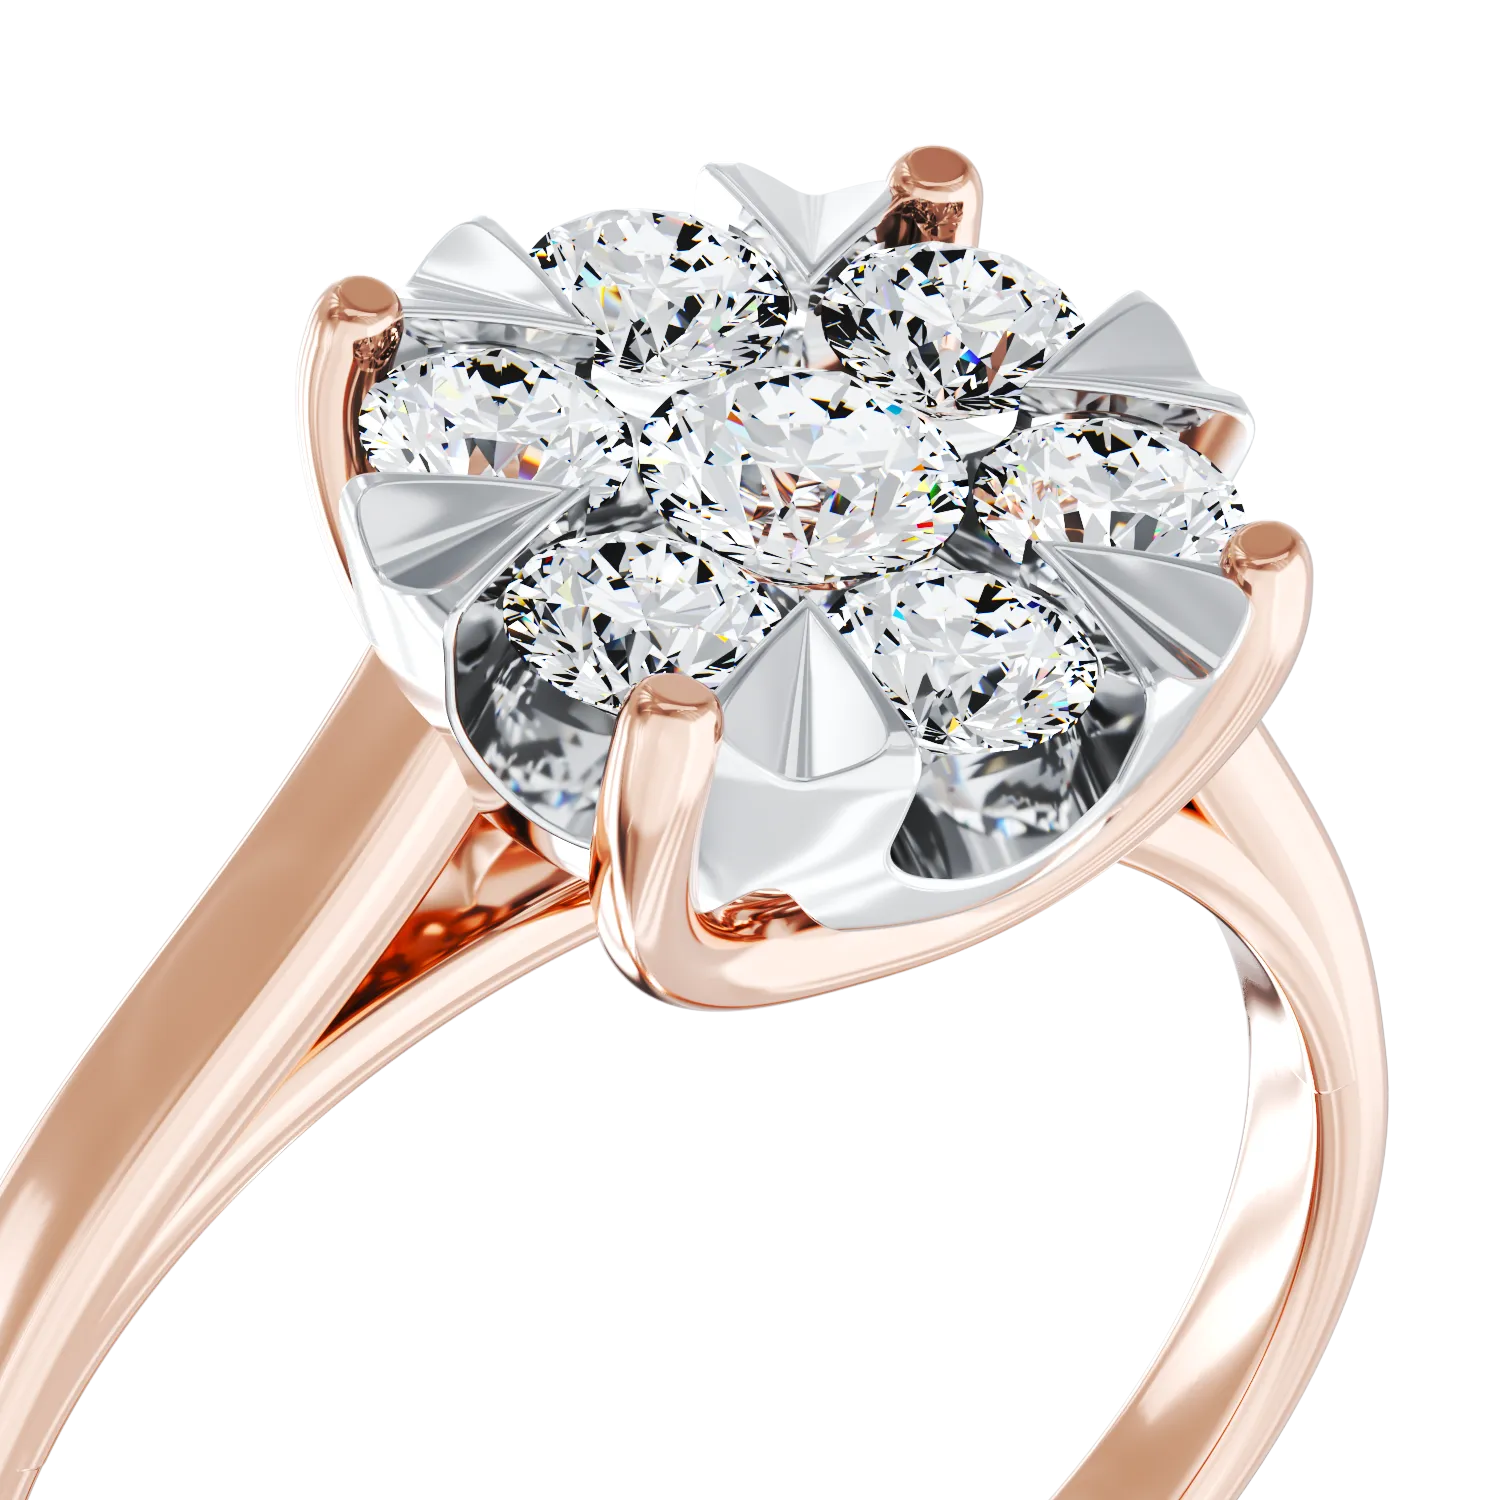 18K rose gold engagement ring with 0.5ct diamonds